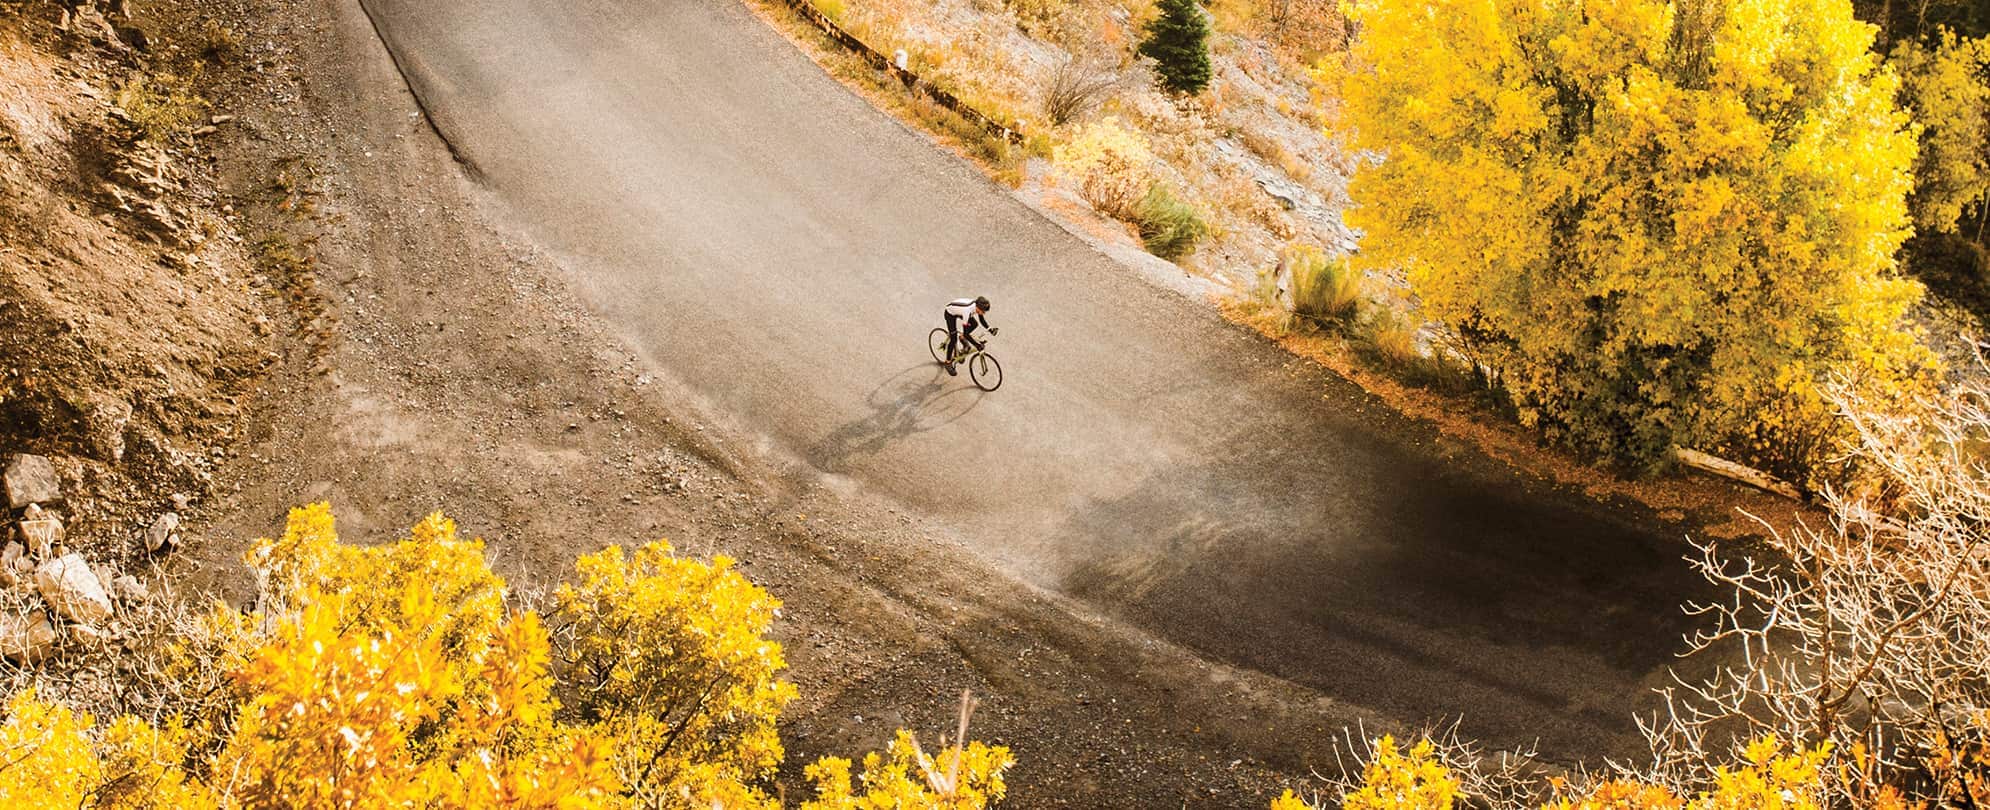 Biker riding down a paved path with lush fall trees